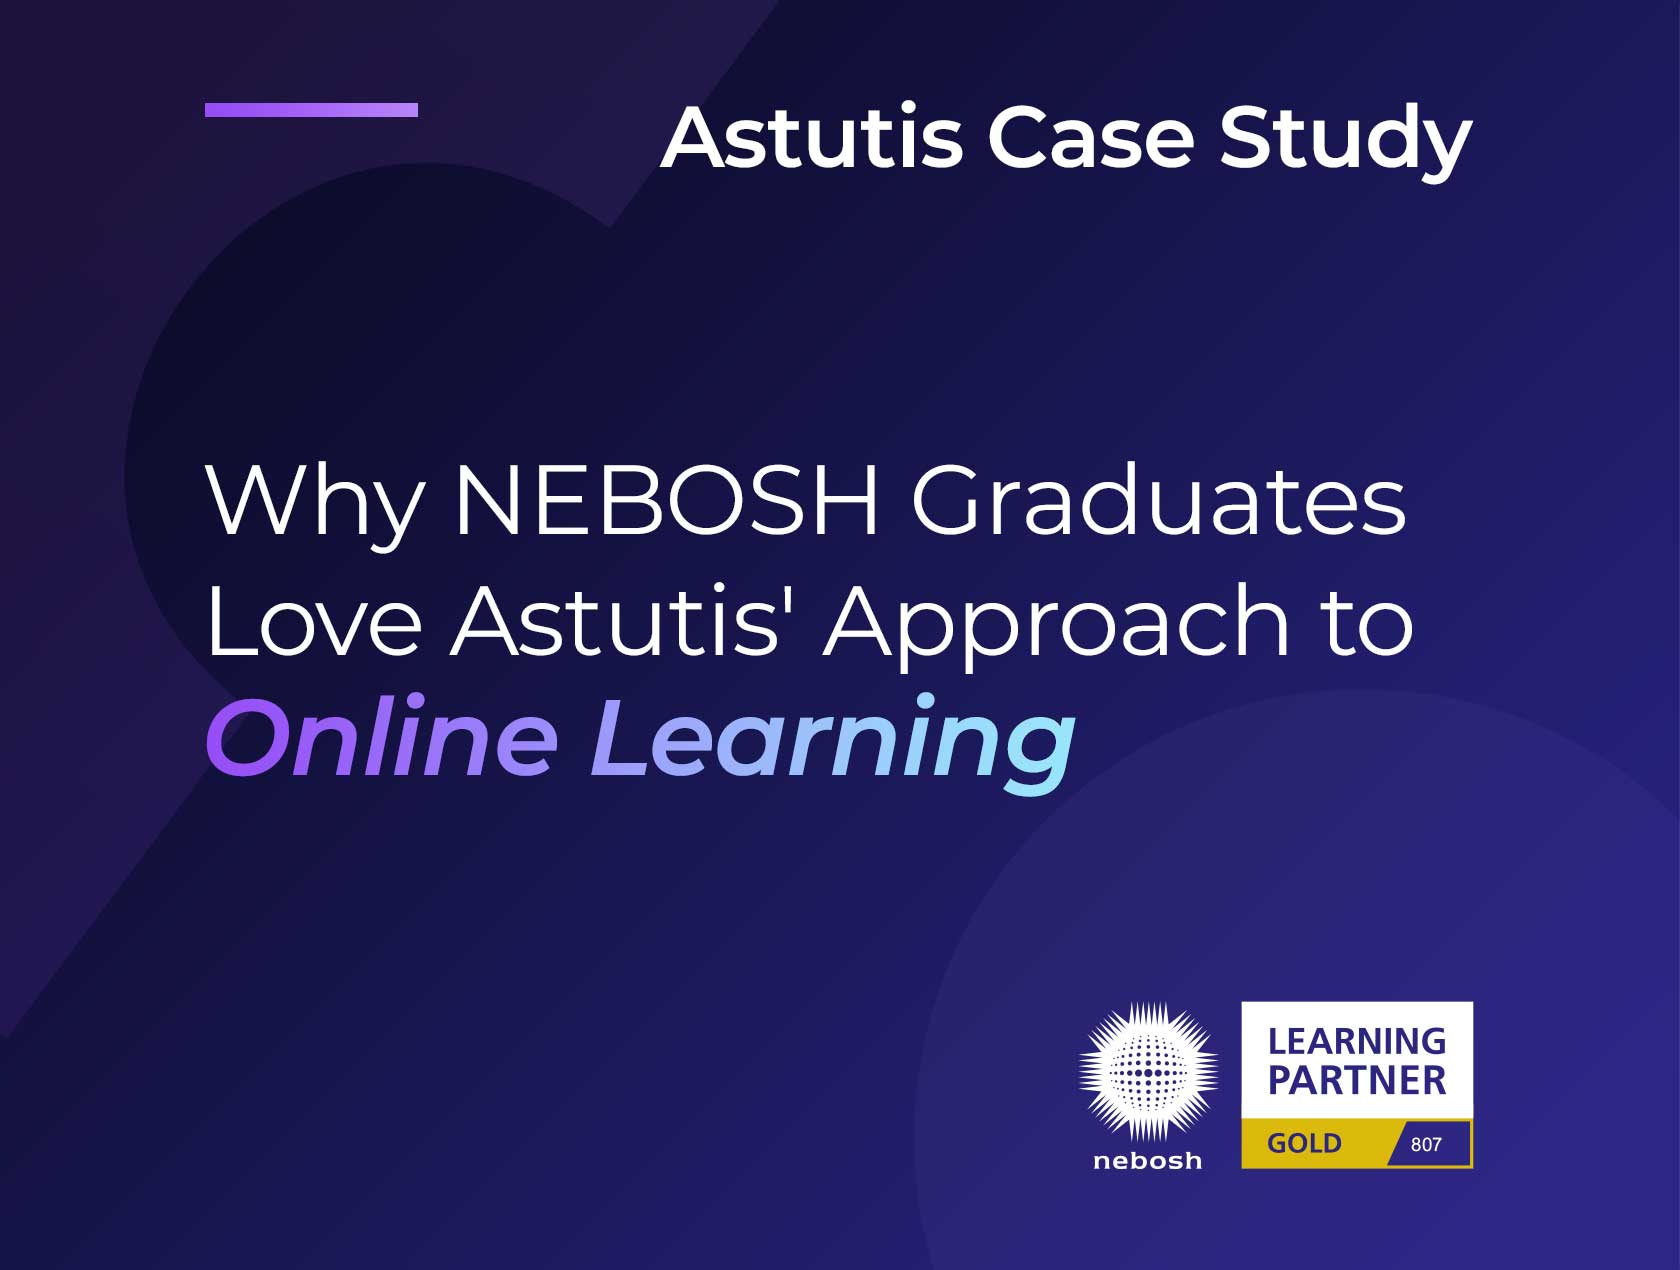 Why NEBOSH Graduates Love Astutis' Approach to Online Learning Image